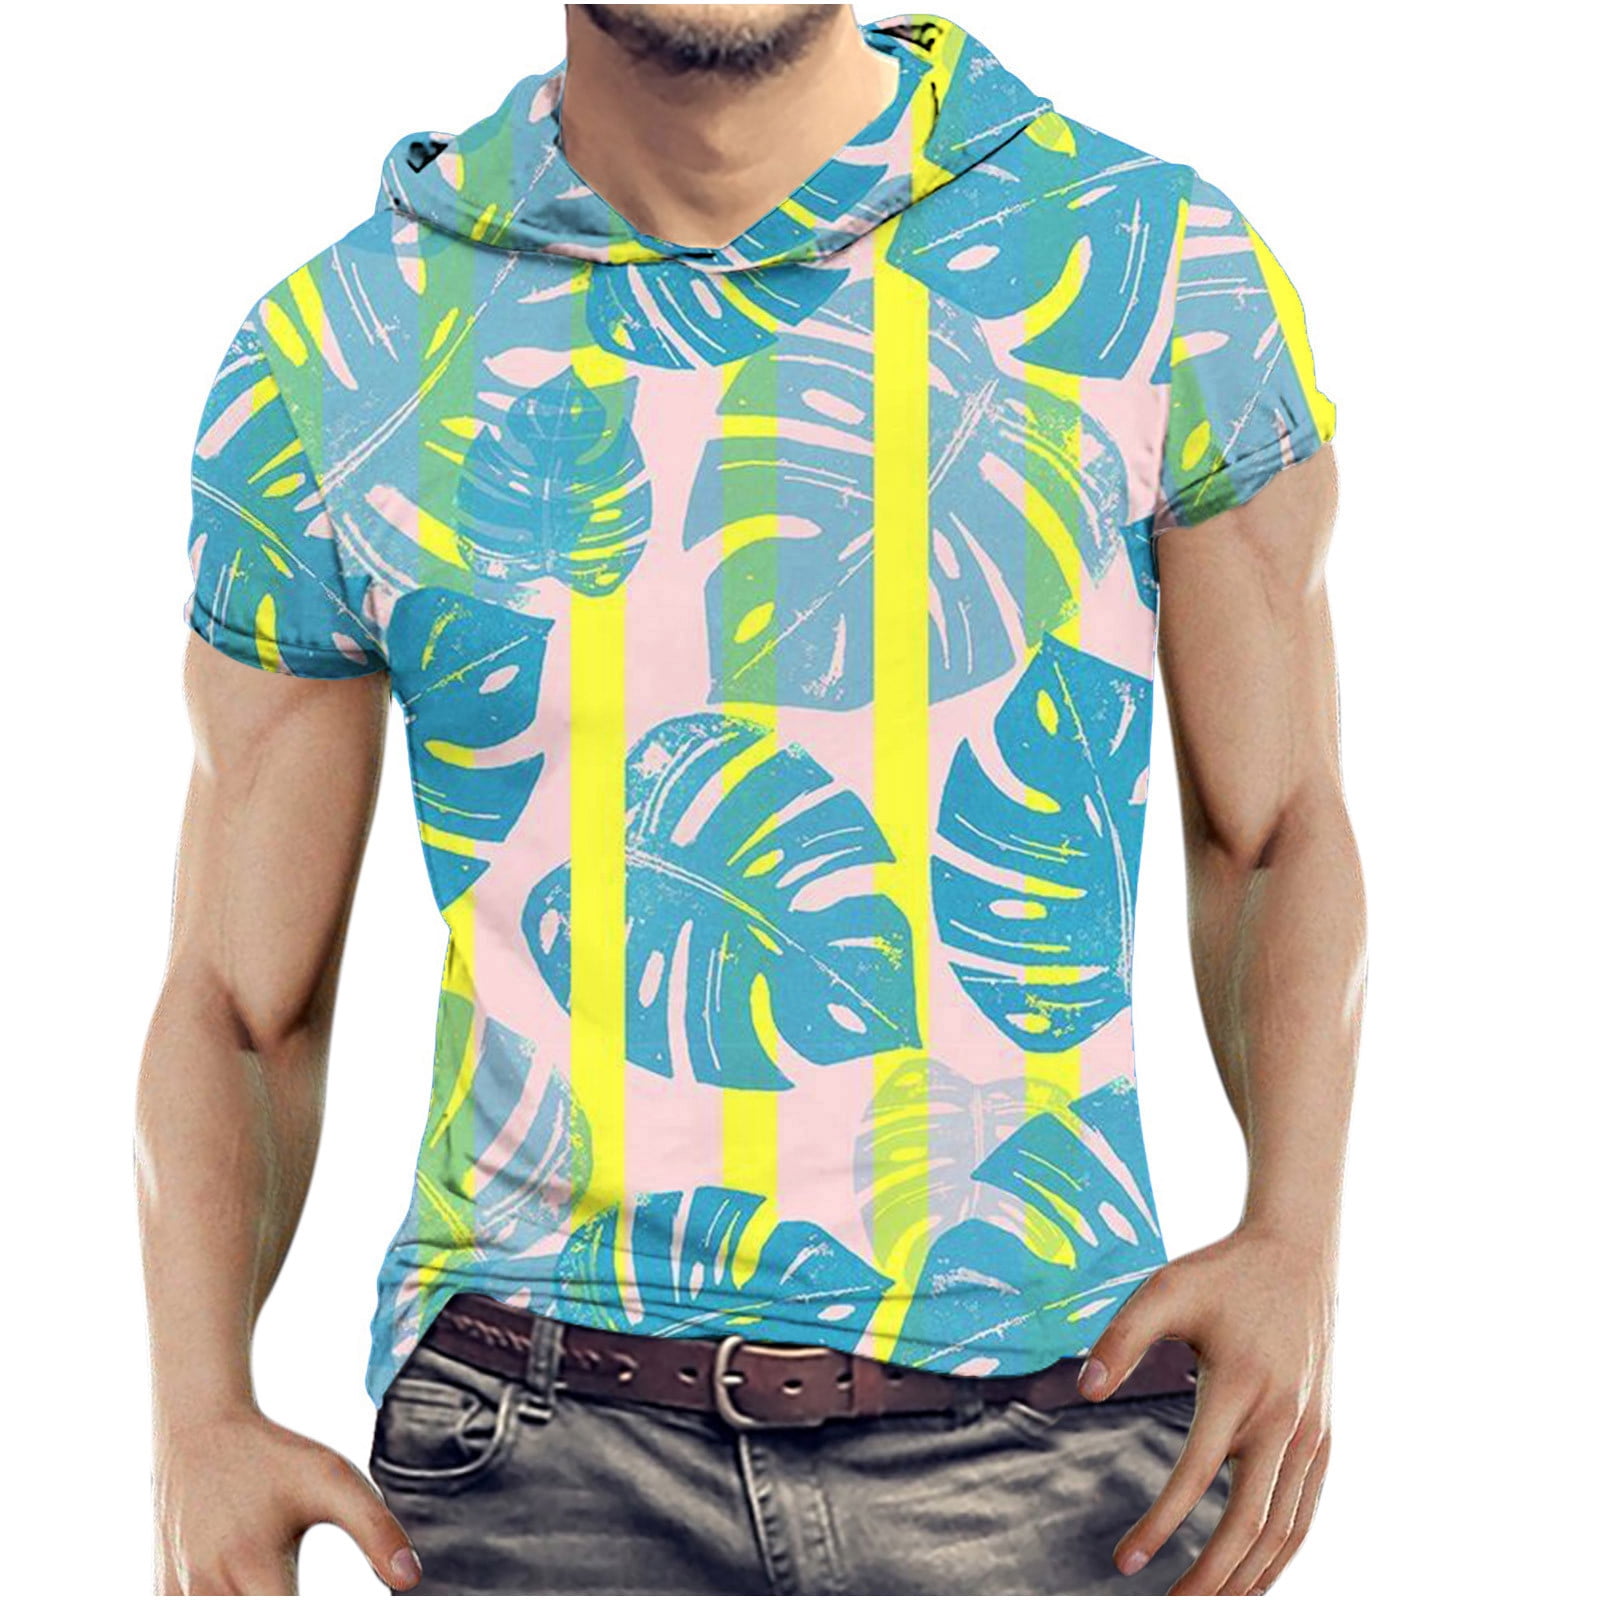 RYRJJ On Clearance Men's 3D Print Hooded Shirts Hawaiin Floral Graphic Tees  Summer Short Sleeve Workout T-Shirts Funny Hoodies Tops Green L 